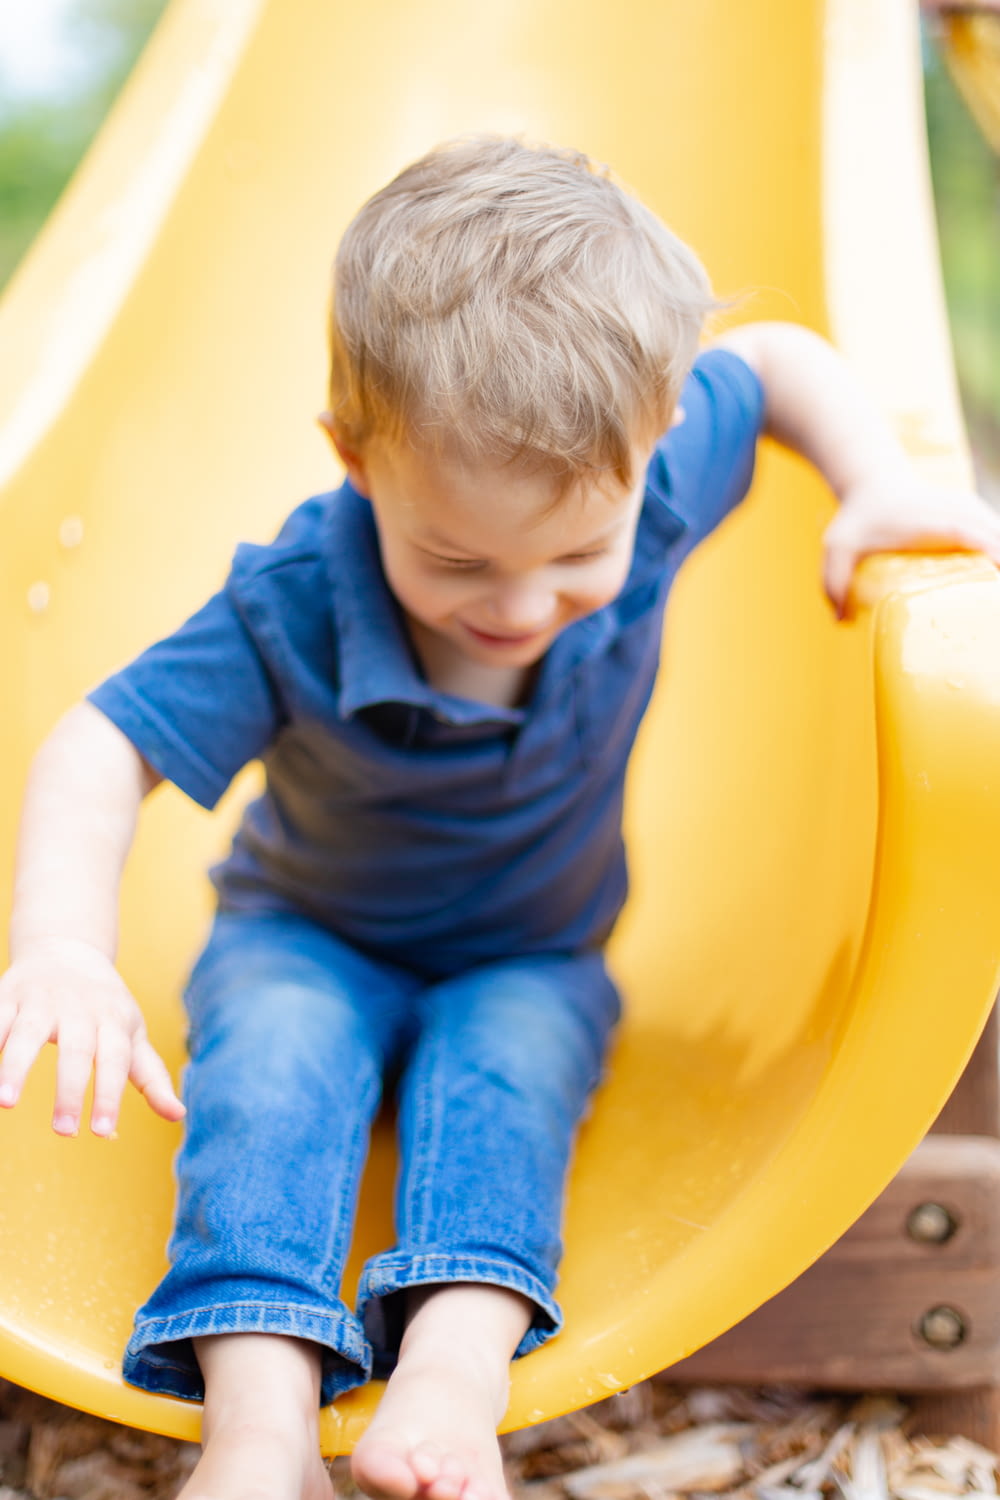 boy in blue t-shirt and blue denim jeans sitting on yellow plastic chair